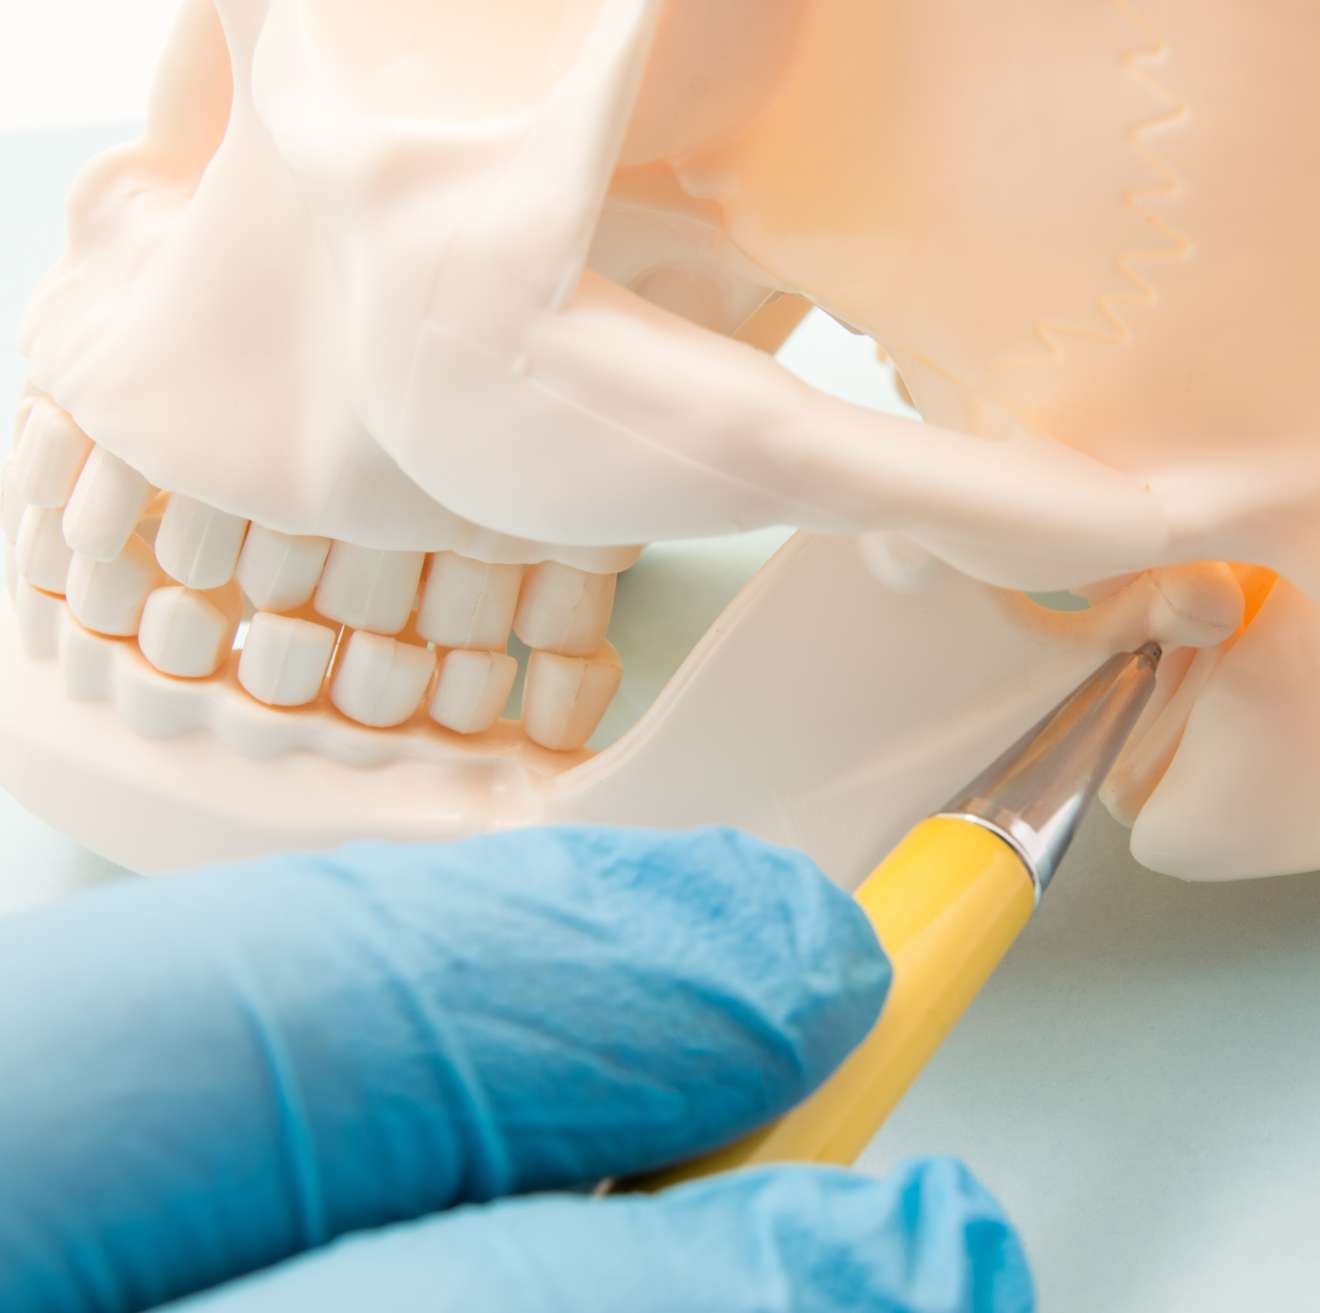 In simple terms, TMJ refers to the temporomandibular joint where the skull (temporal bone) connects to the jawbone (mandible).